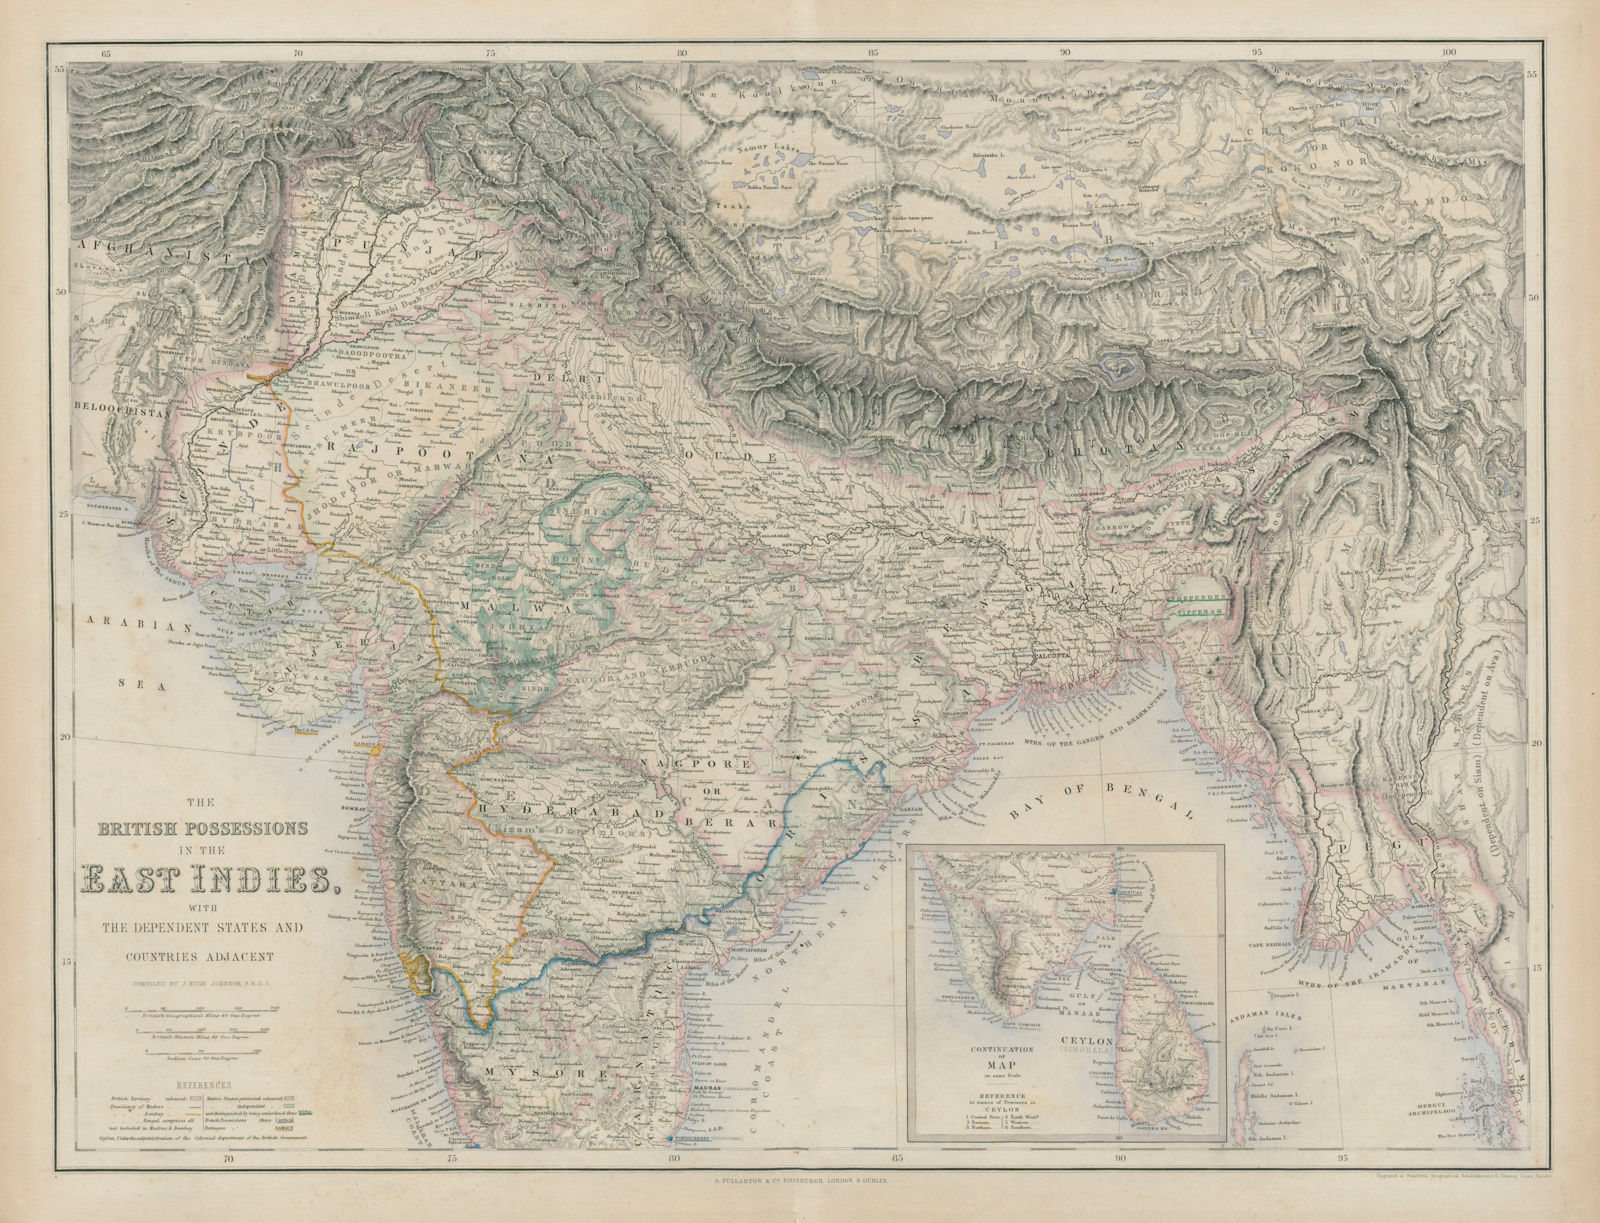 British Possessions in the East Indies… India & Burma. SWANSTON 1860 old map